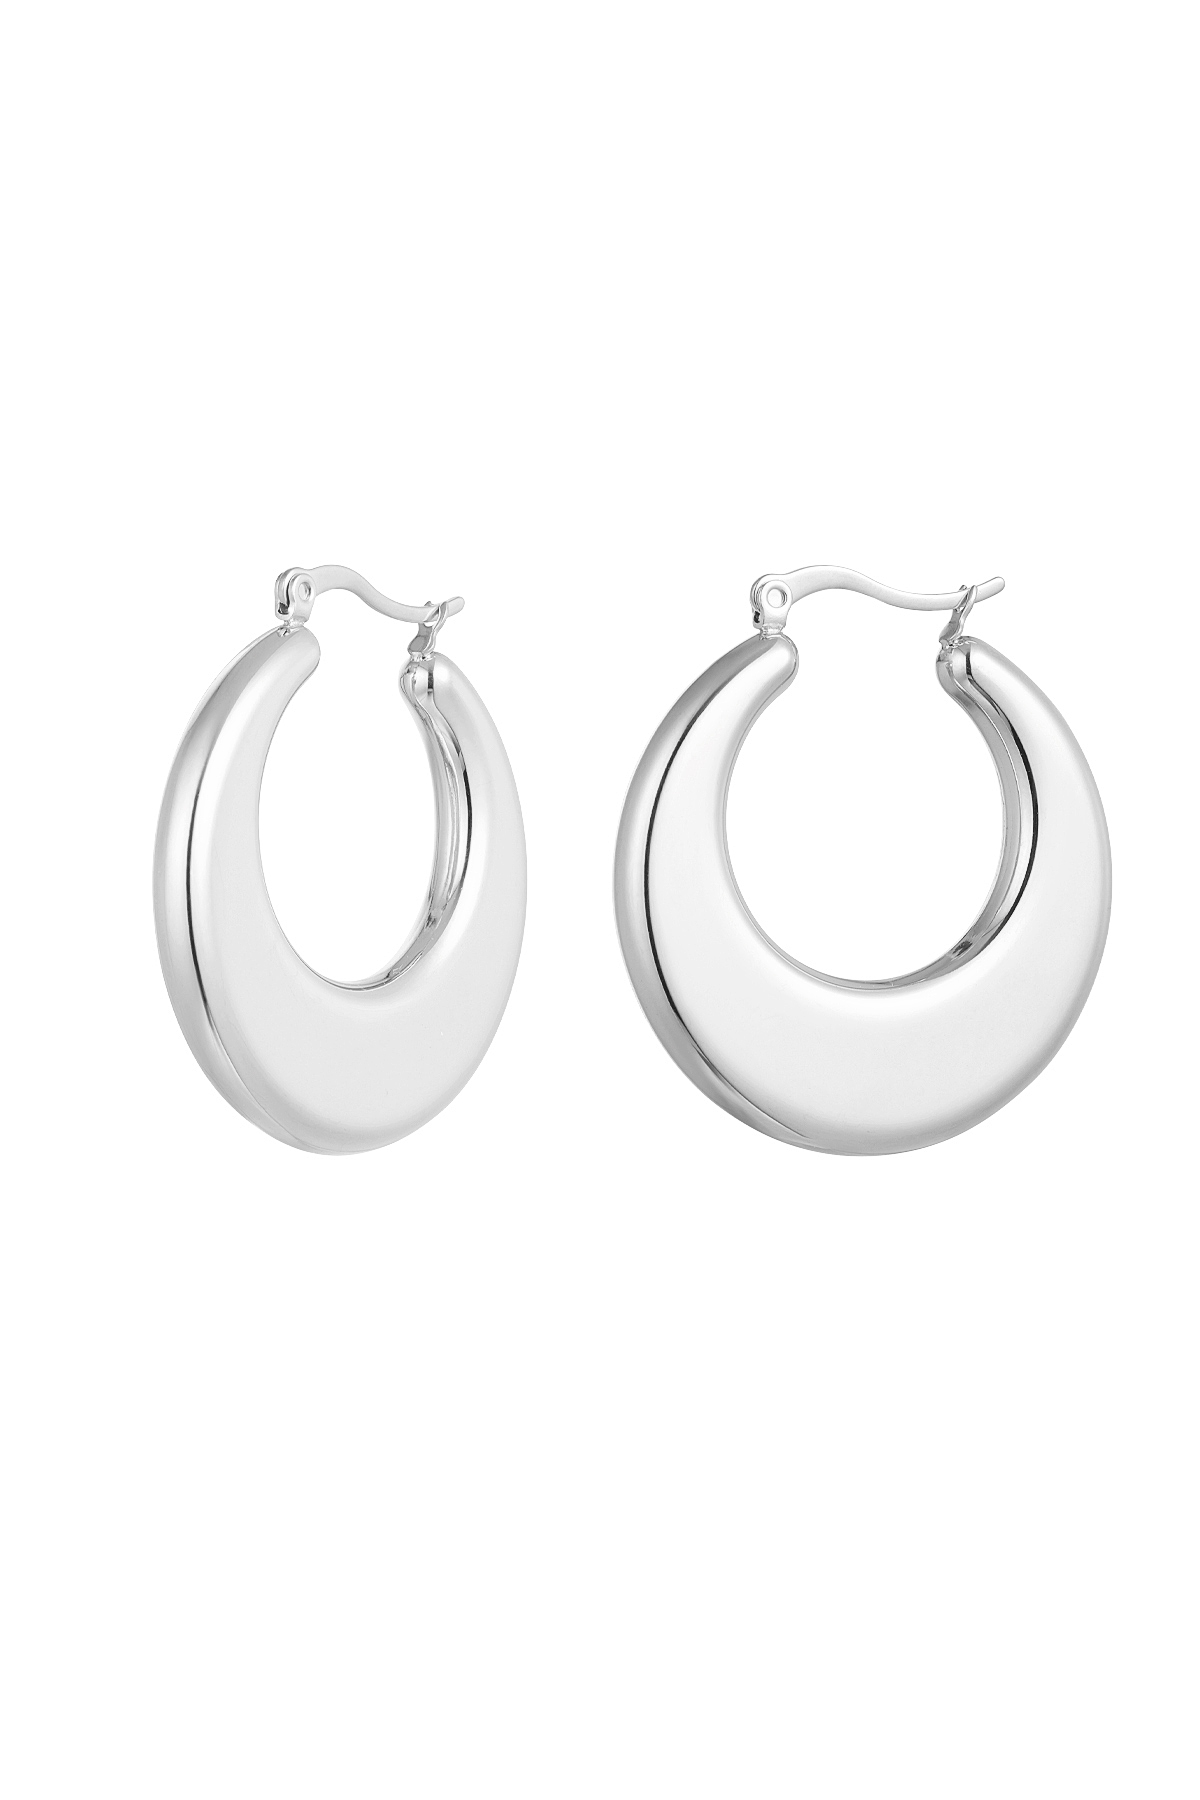 Earrings round classy must-have - silver h5 